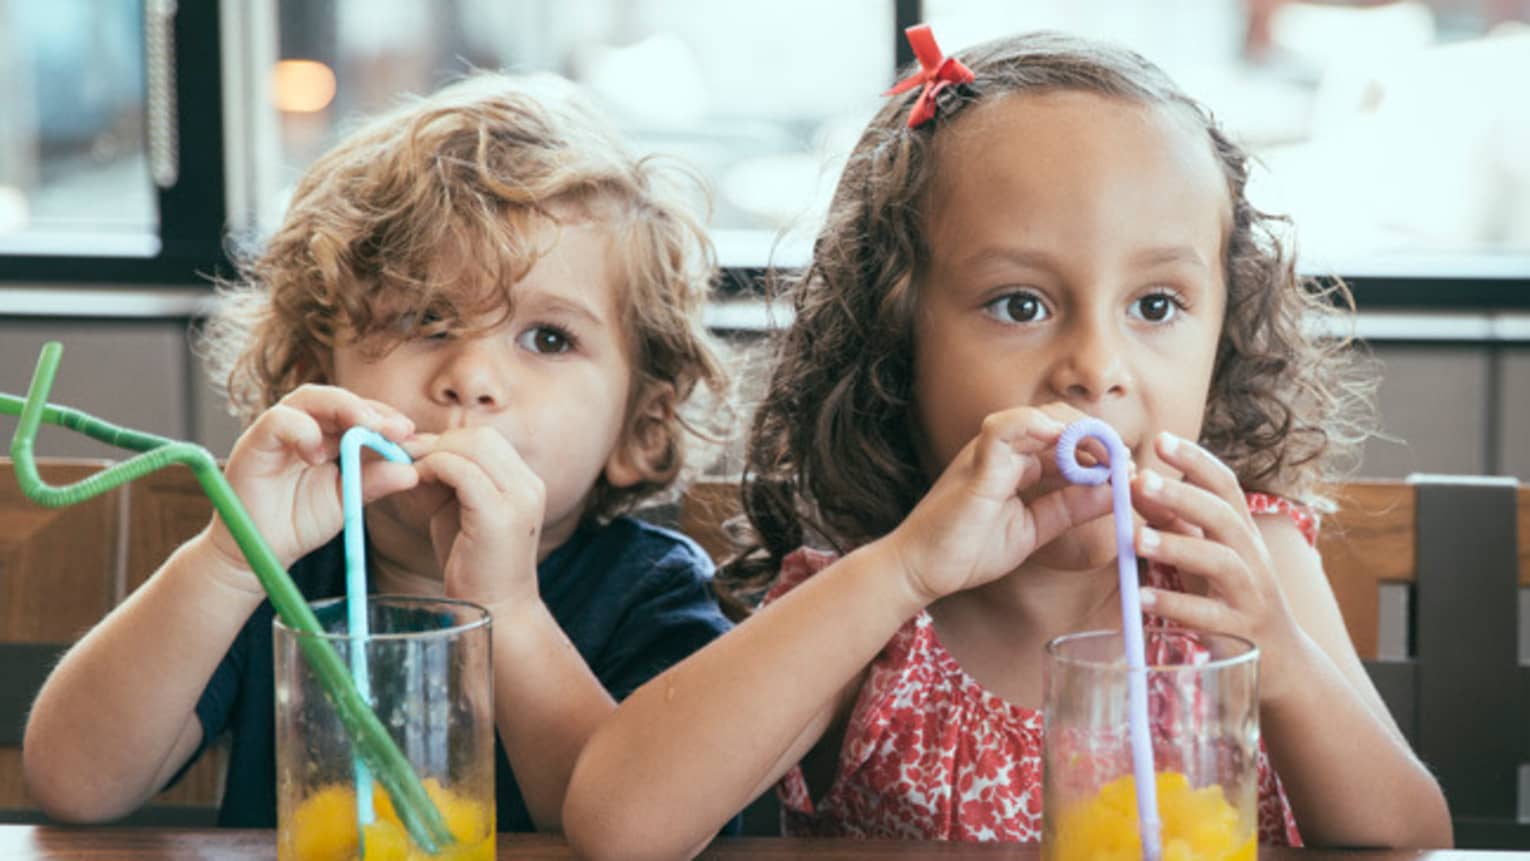 Two small children with curly hair sit side-by-side drinking juice with swirly straws at Club 760